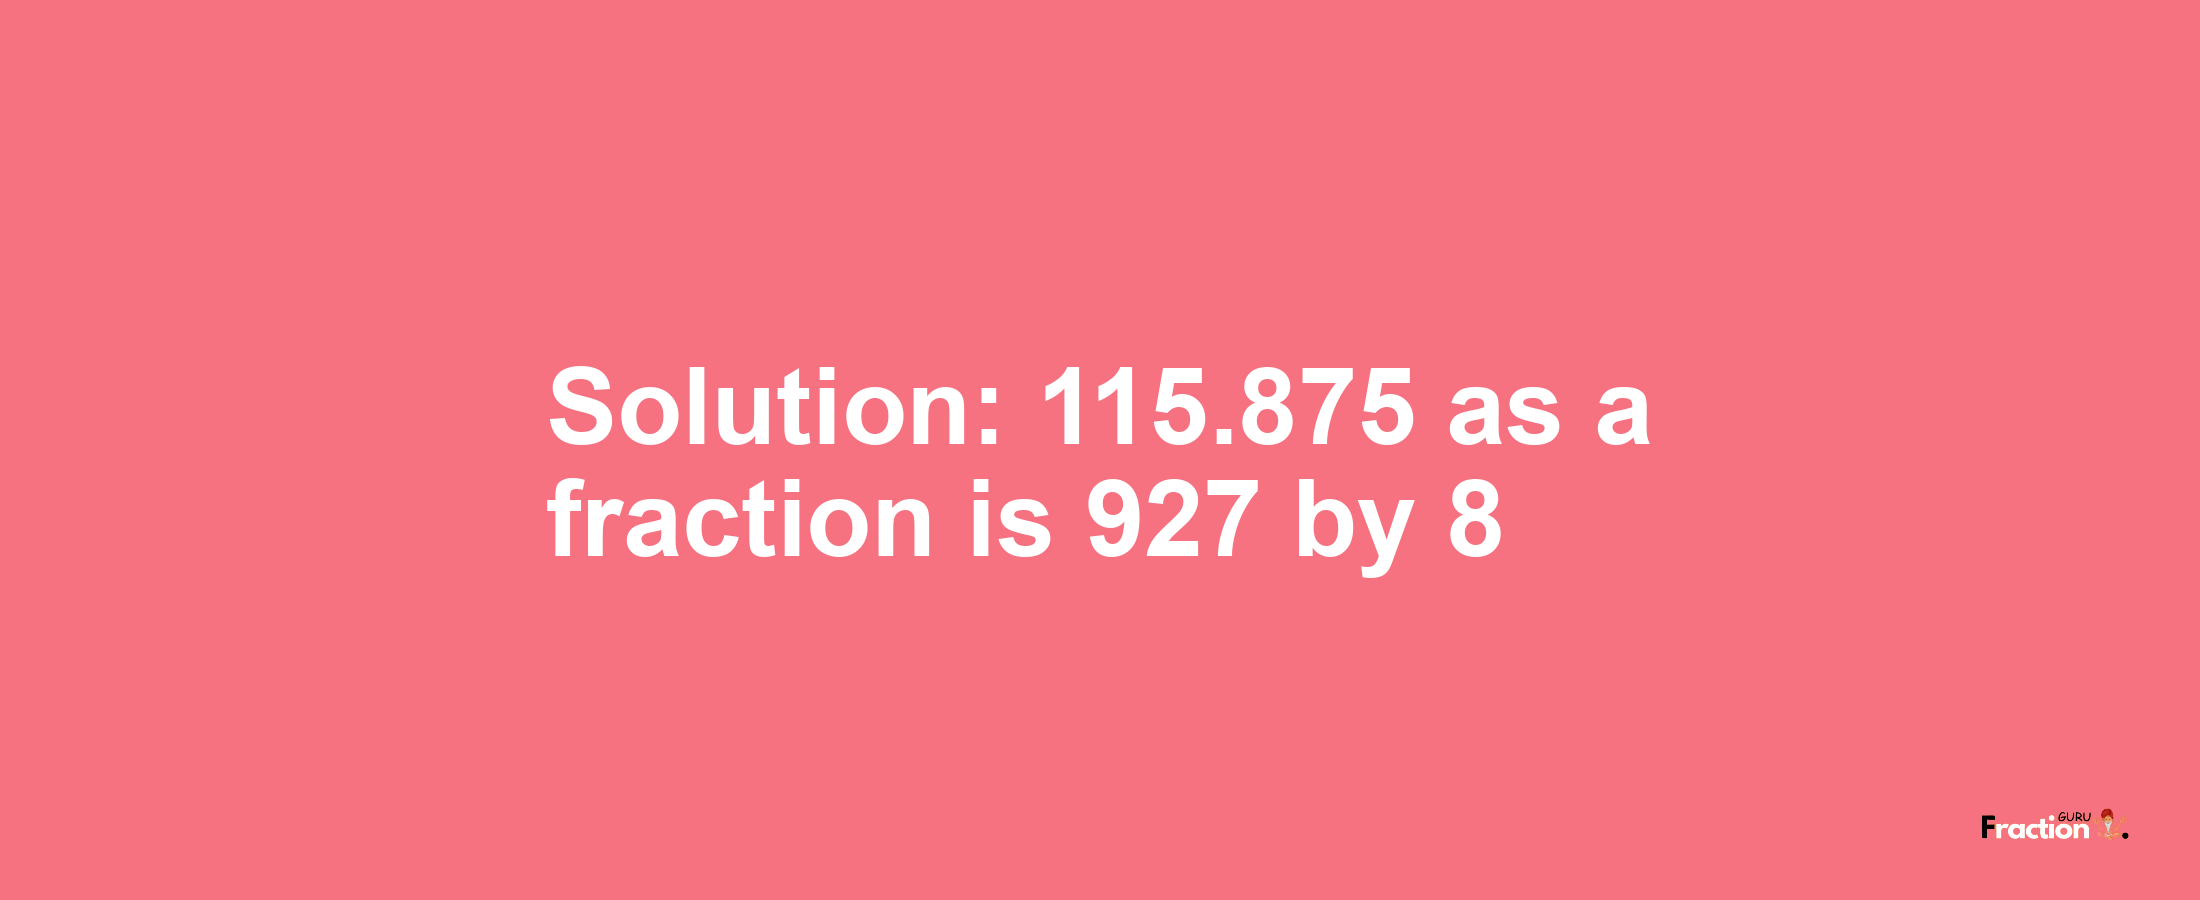 Solution:115.875 as a fraction is 927/8